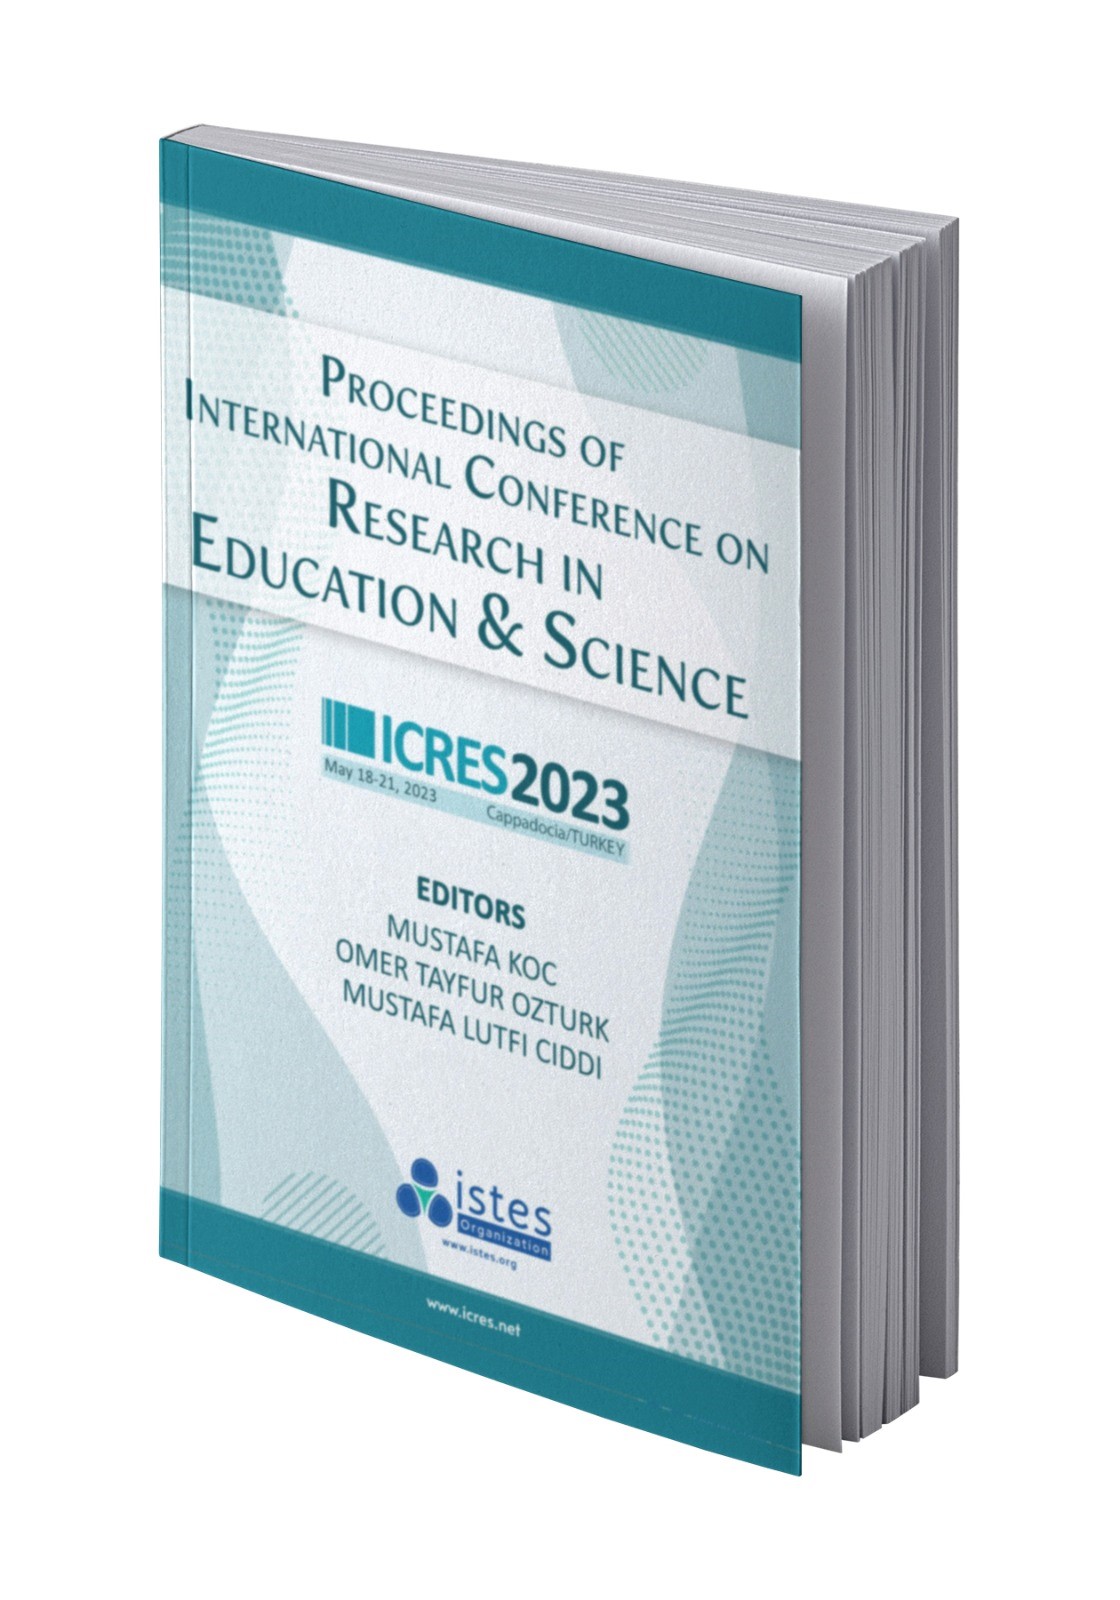 Proceedings of International Conference on Research in Education and Science 2023